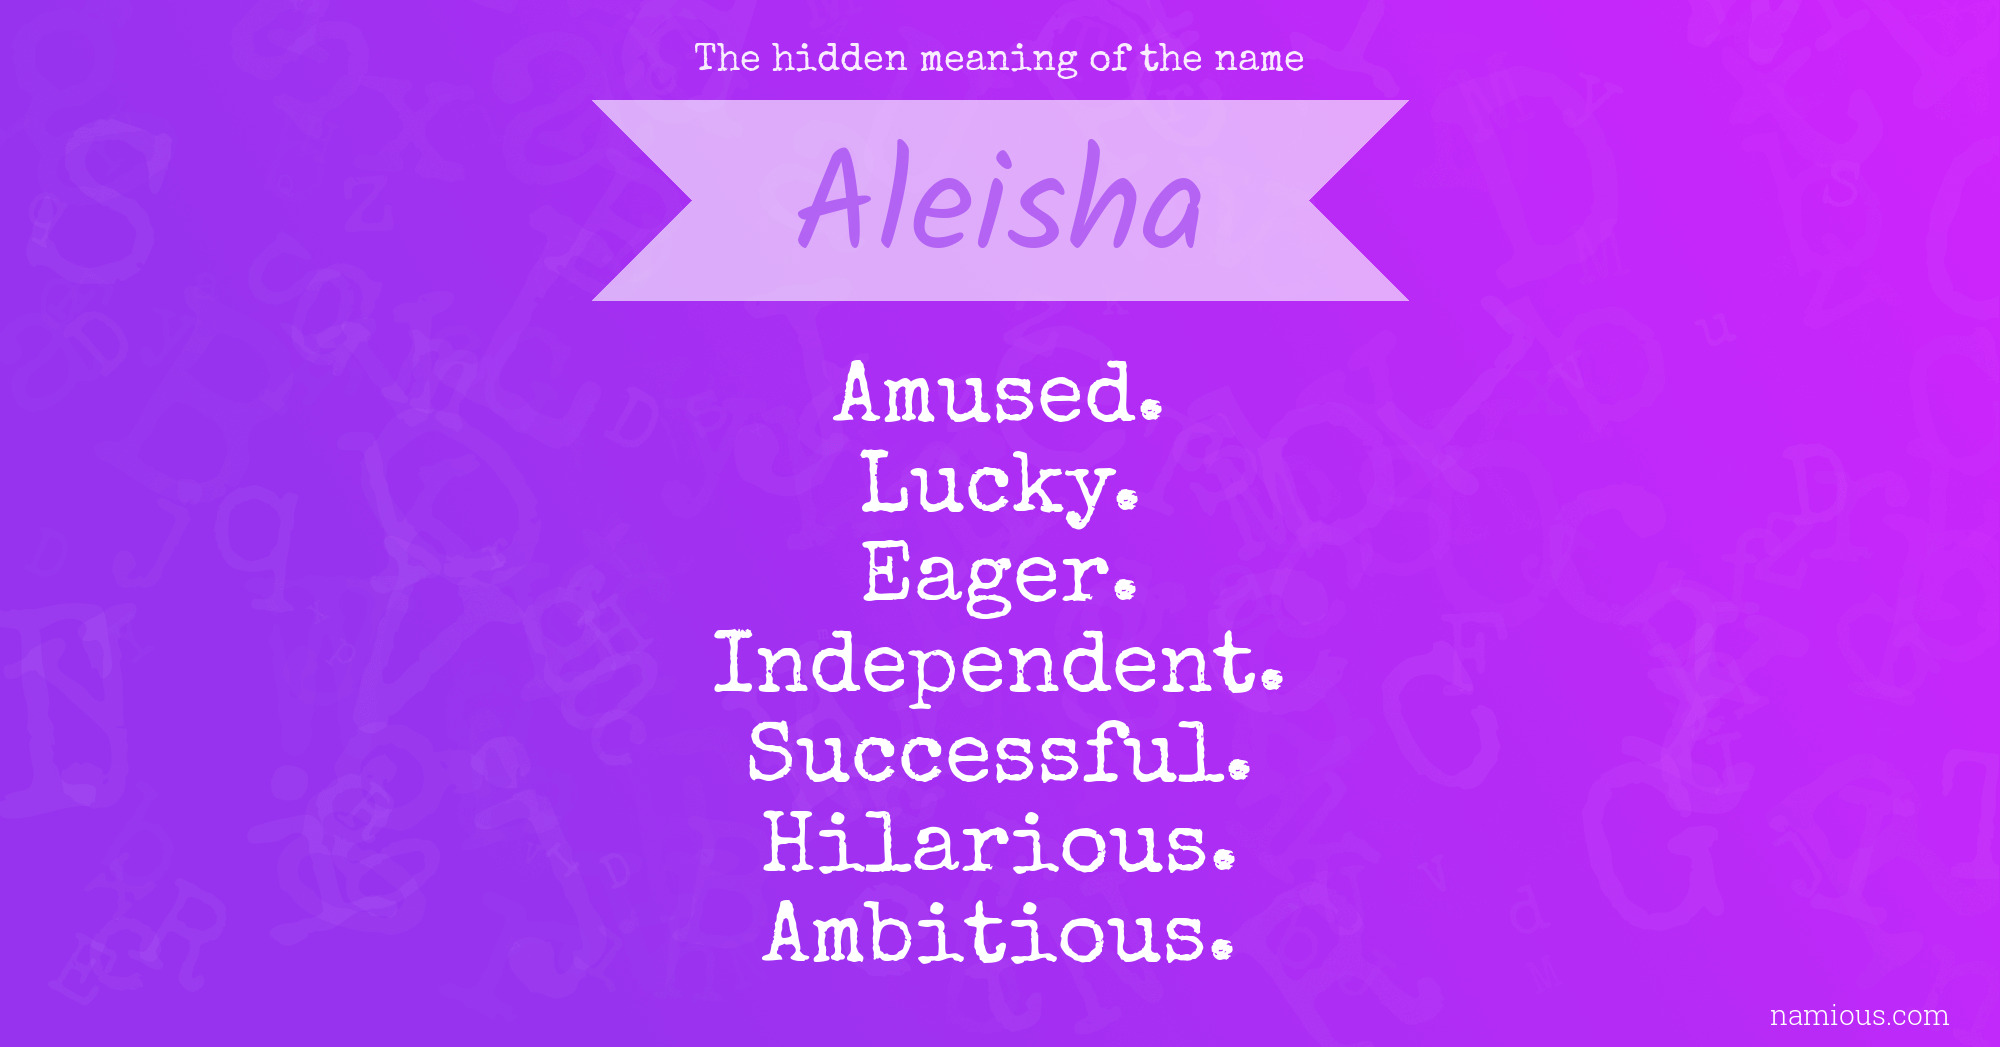 The hidden meaning of the name Aleisha